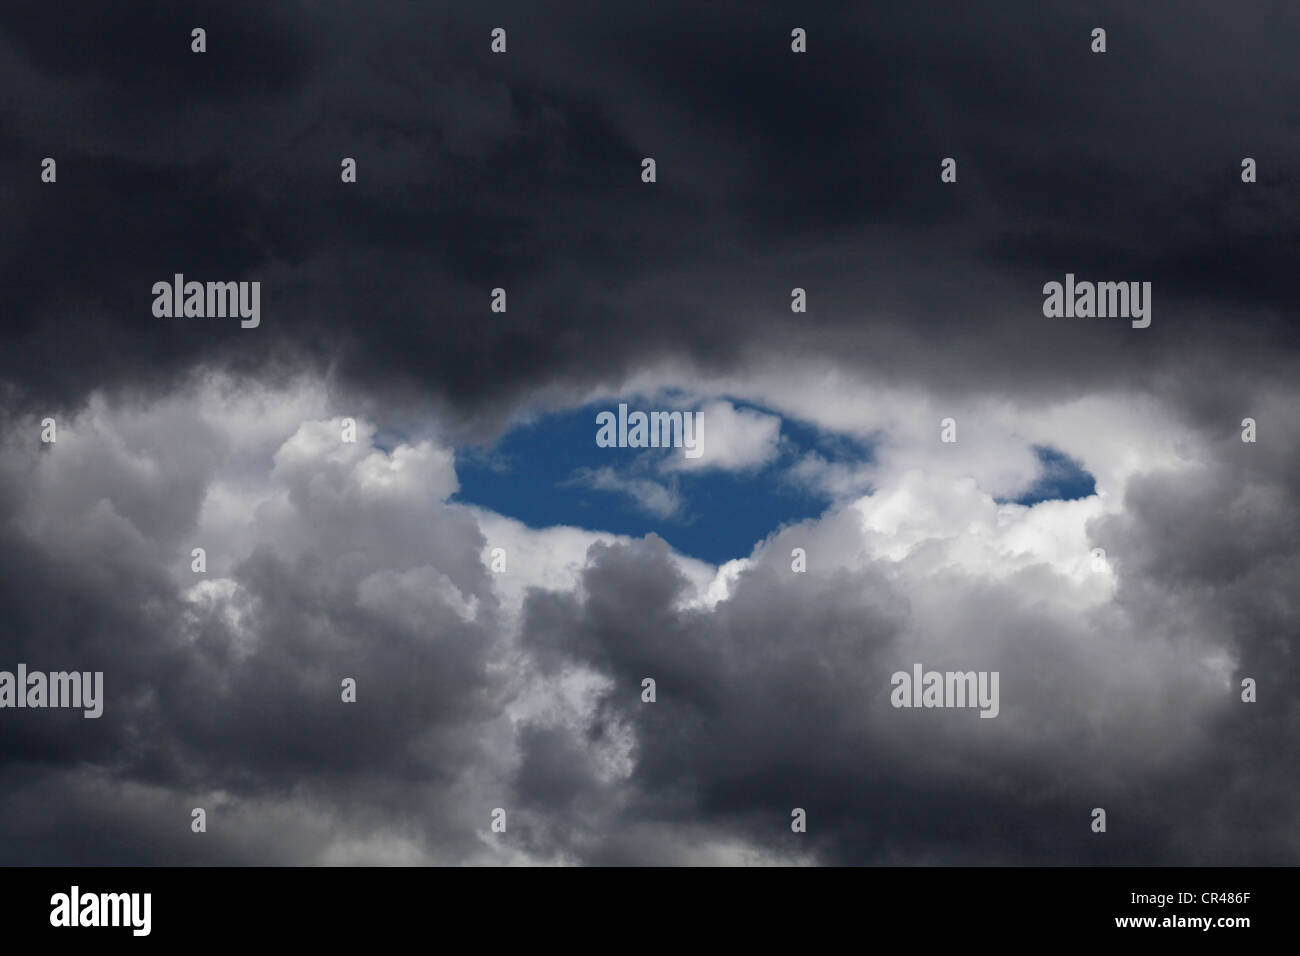 A section of the sky with rain threatening clouds fringed with cumulus clouds. Stock Photo